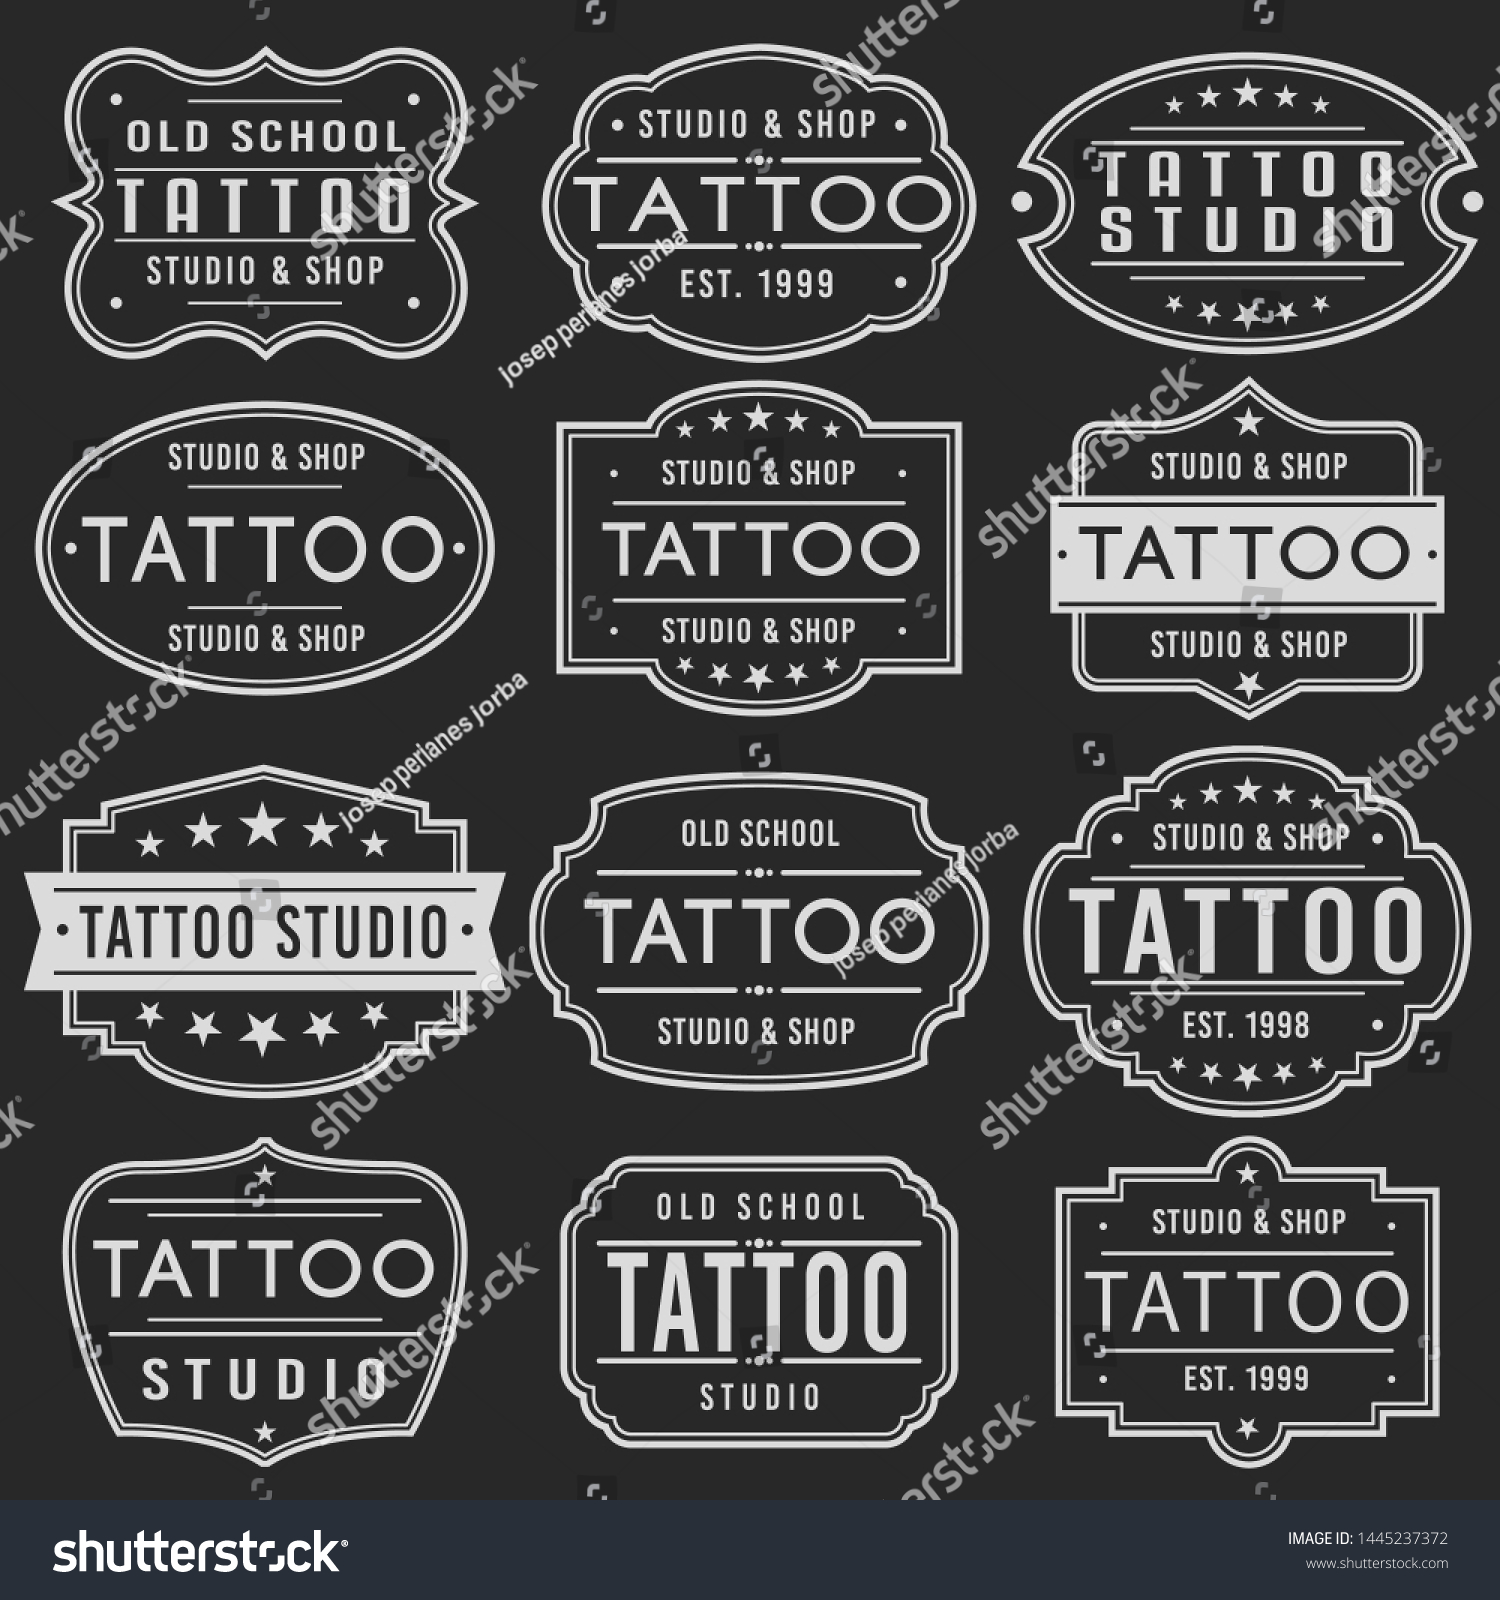 Tattoo Premium Quality Stamp Frames Grunge Stock Vector (Royalty Free ...